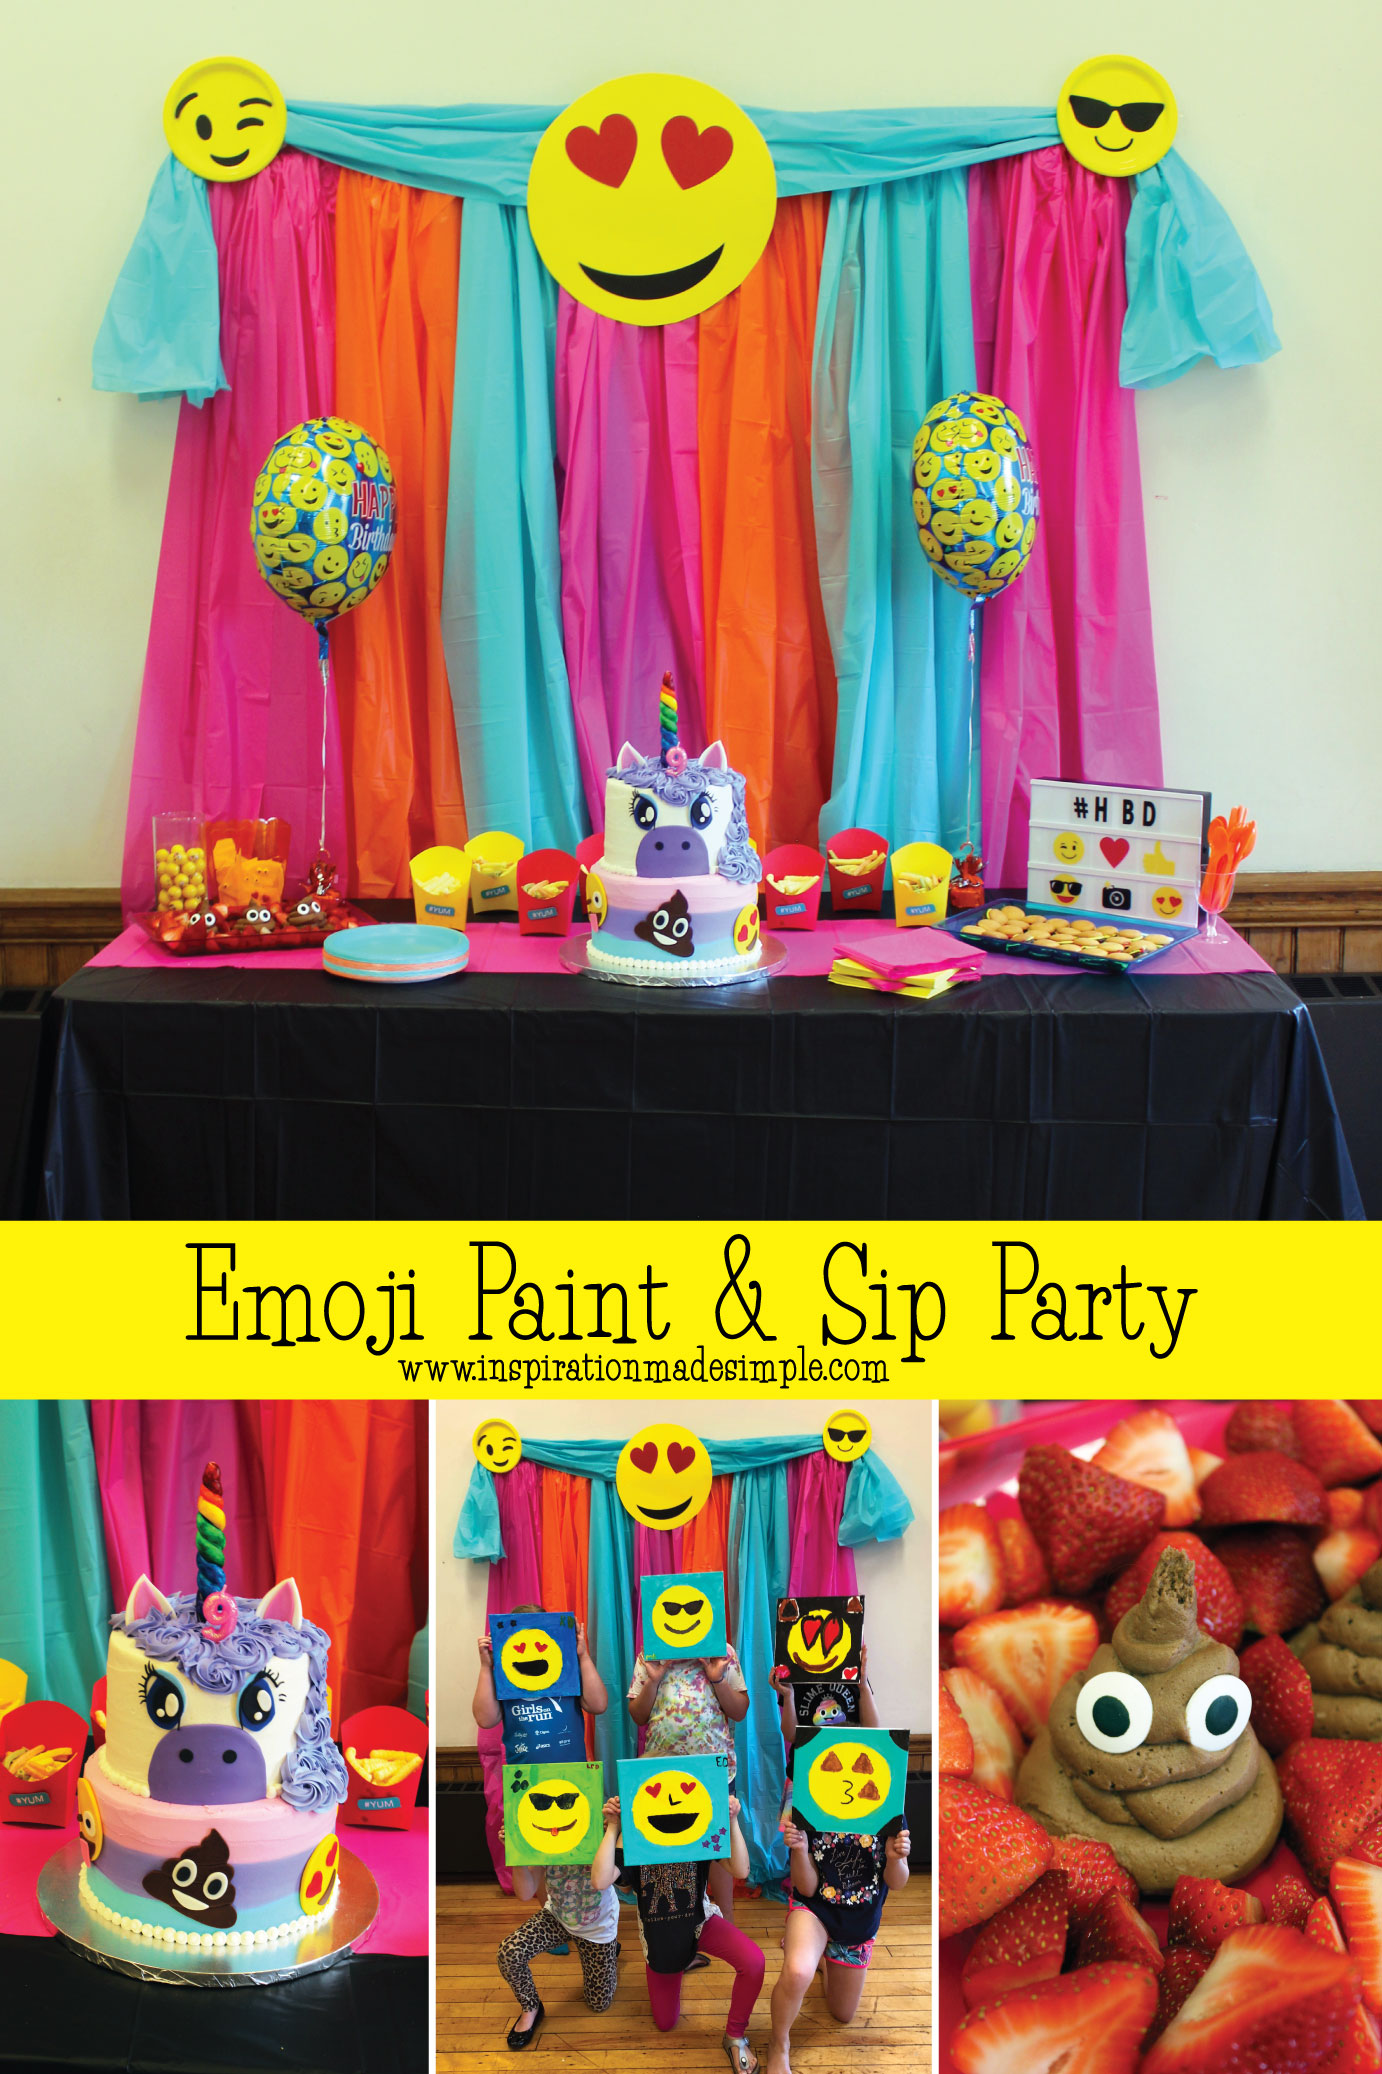 Emoji Paint and Sip Party for Kids